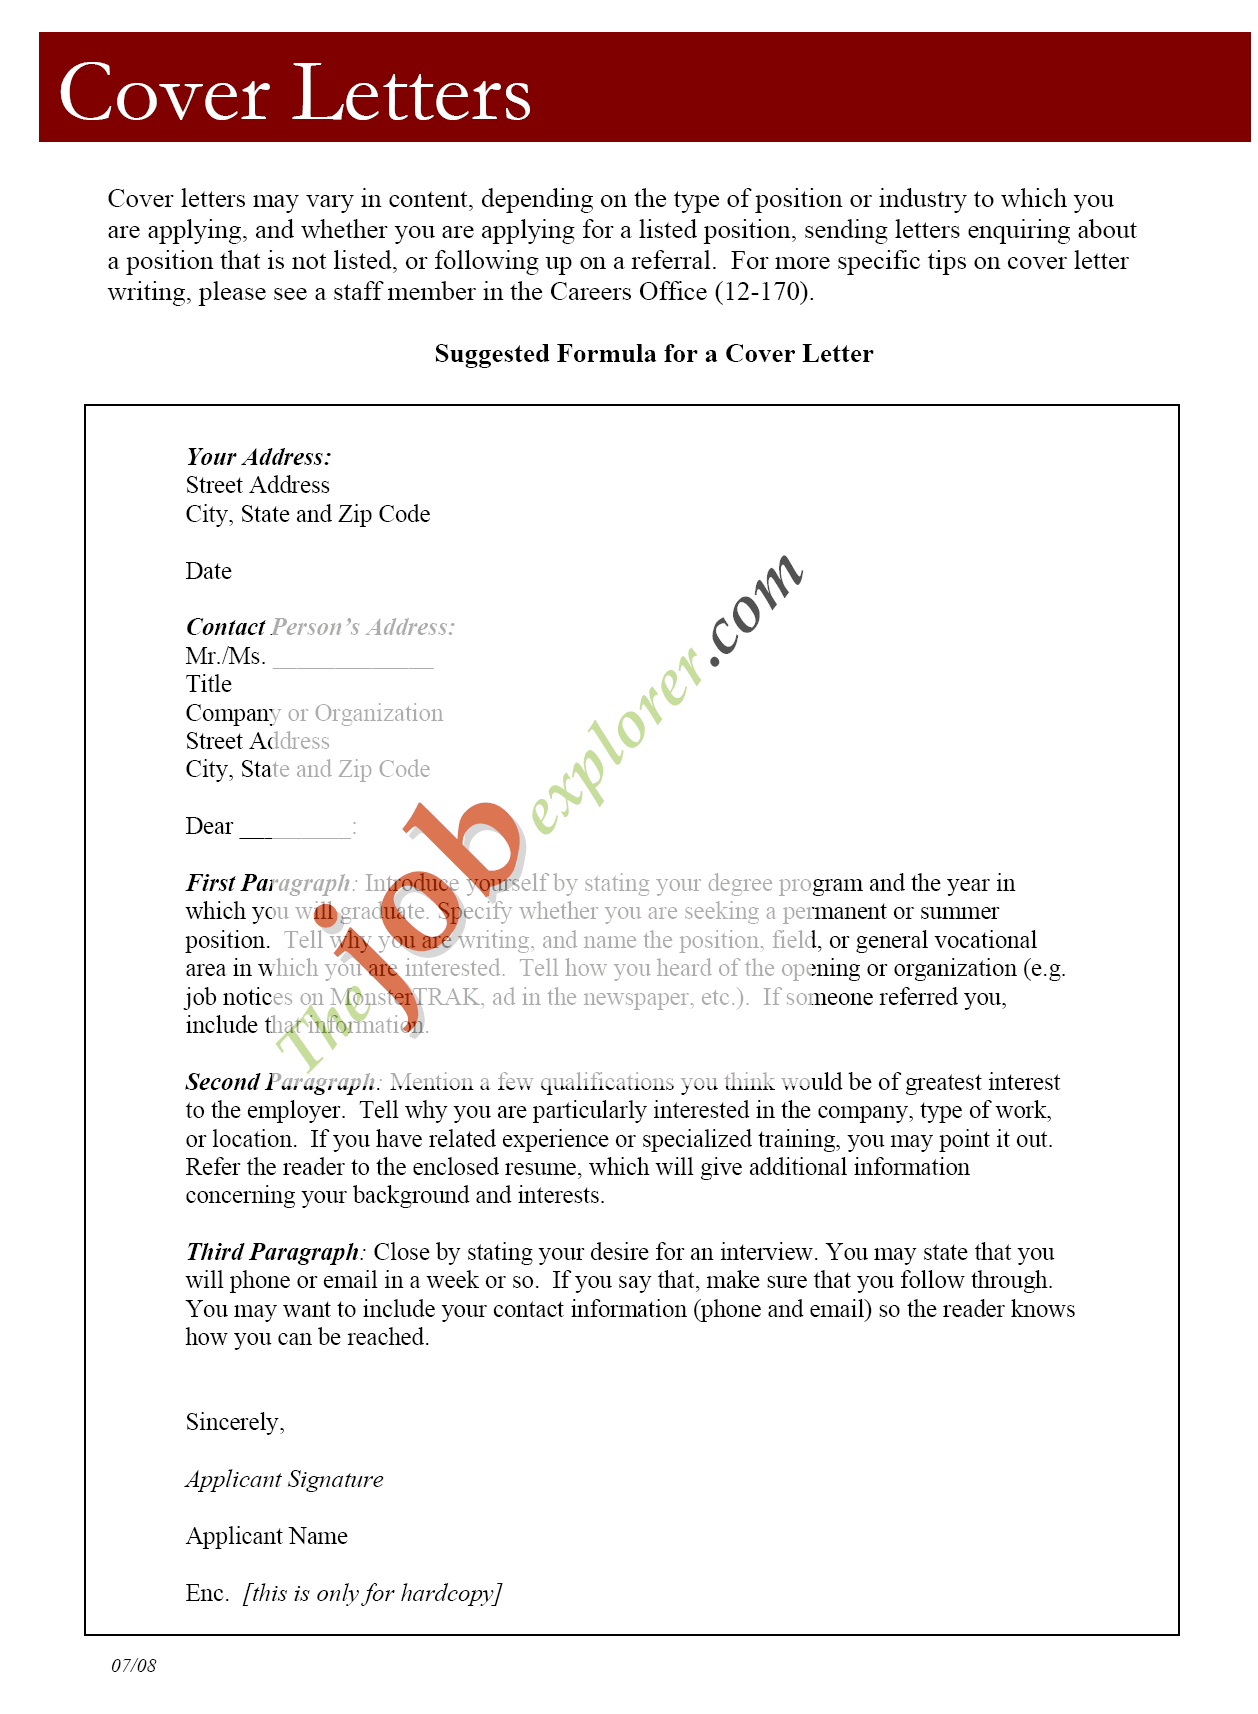 Sample Cover Letter For Biomedical Engineering Jobs - 200 ...